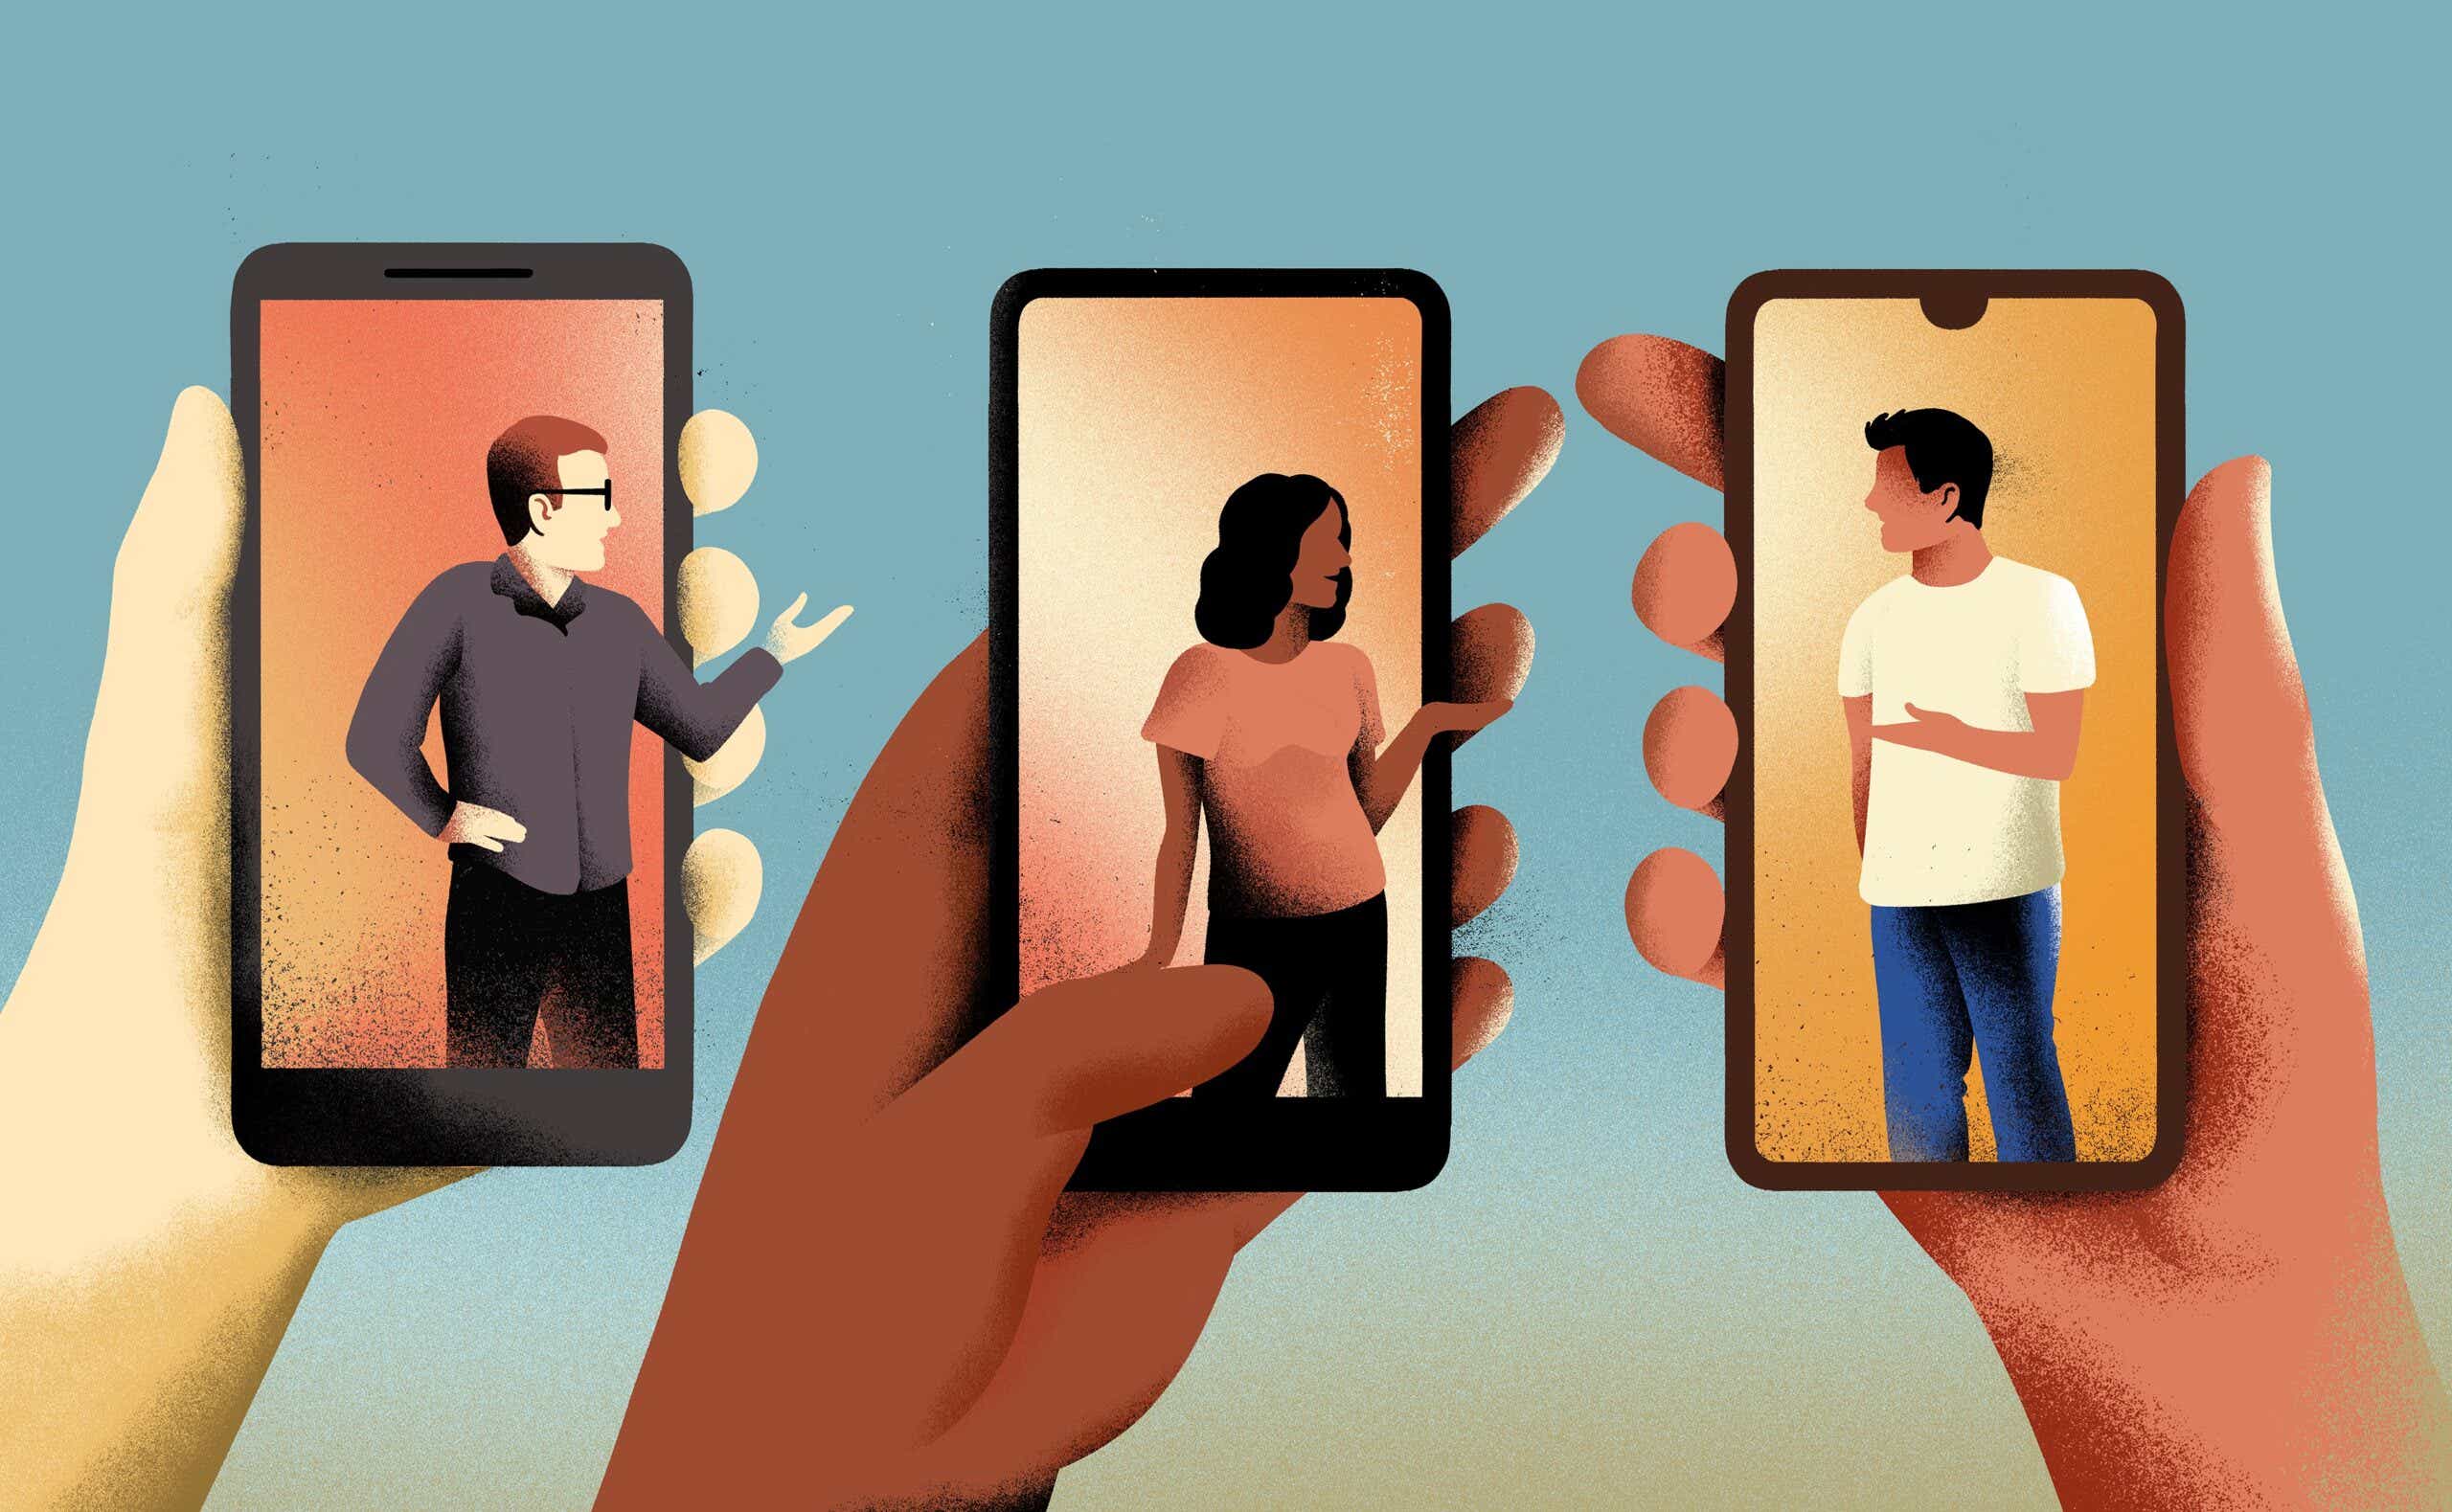 illustration of people holding their phones and interacting